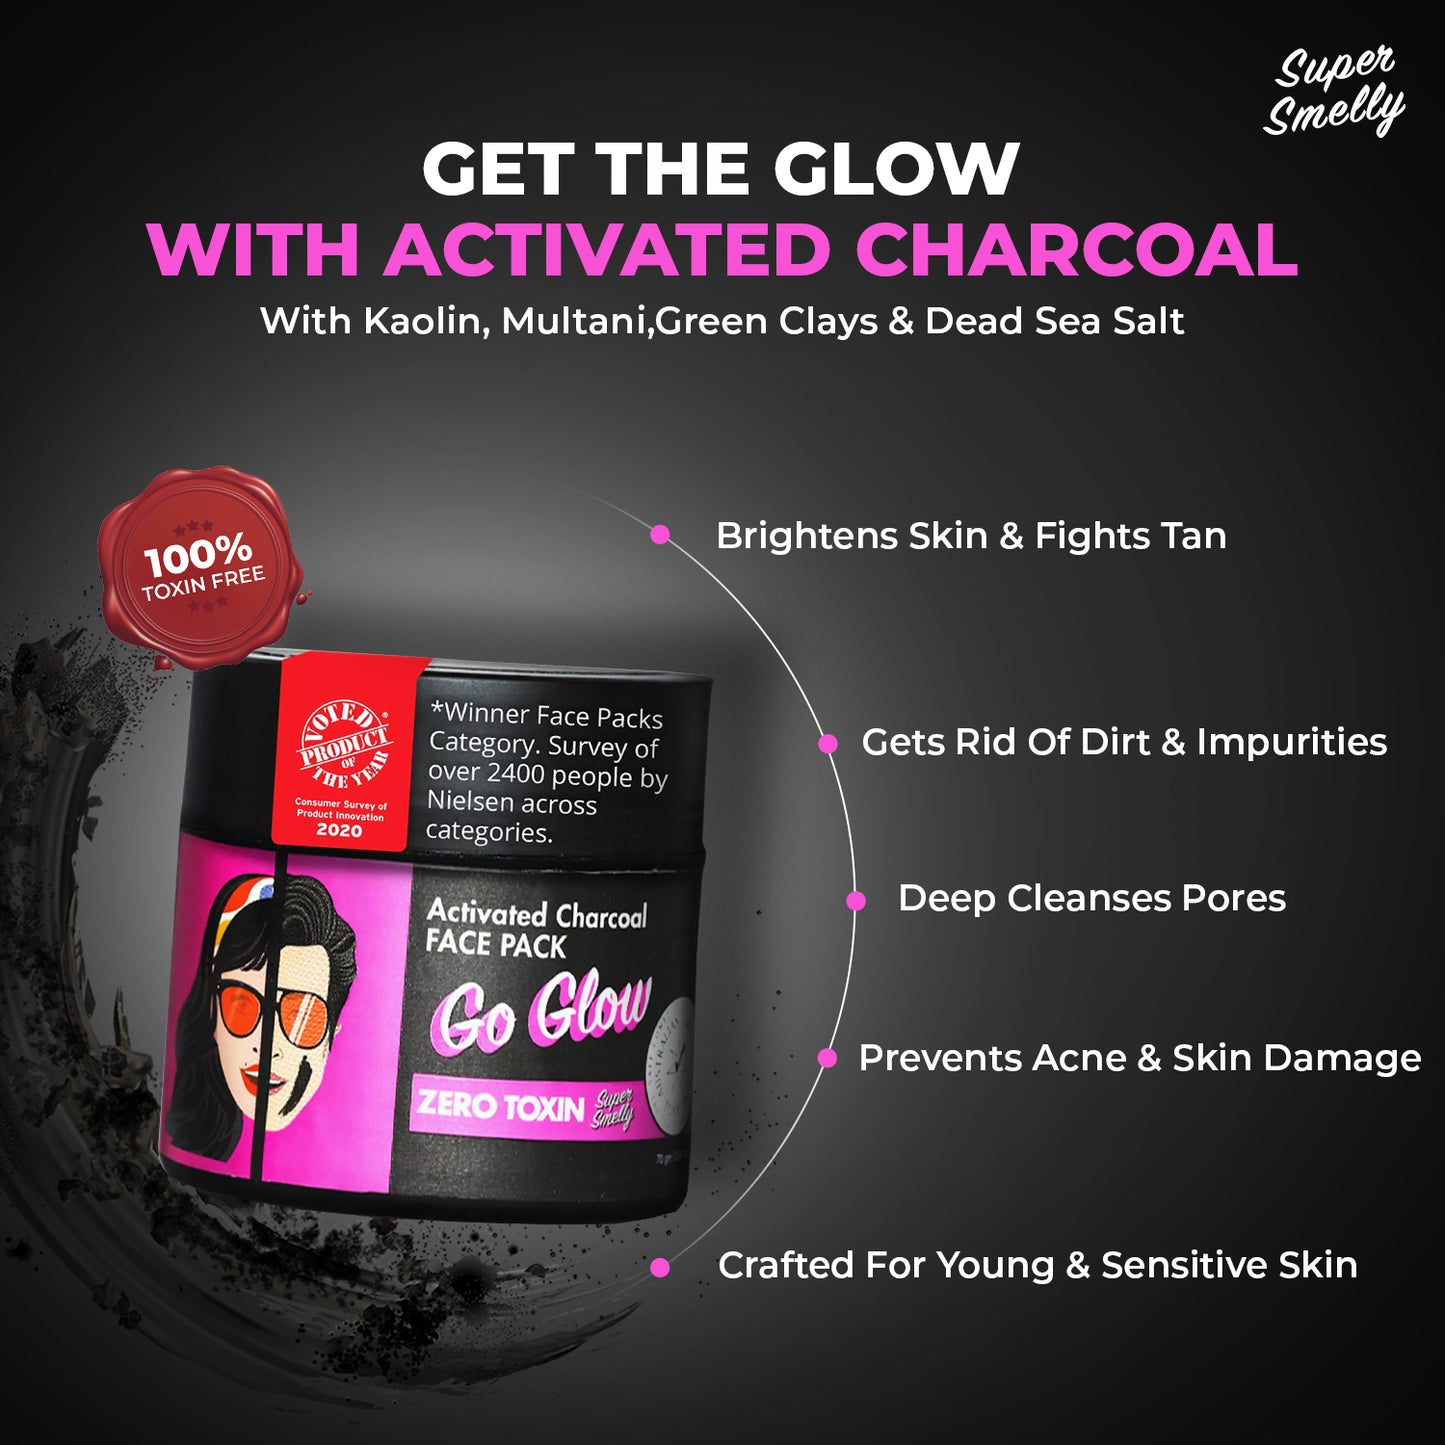 Go Glow Activated Charcoal Face Pack